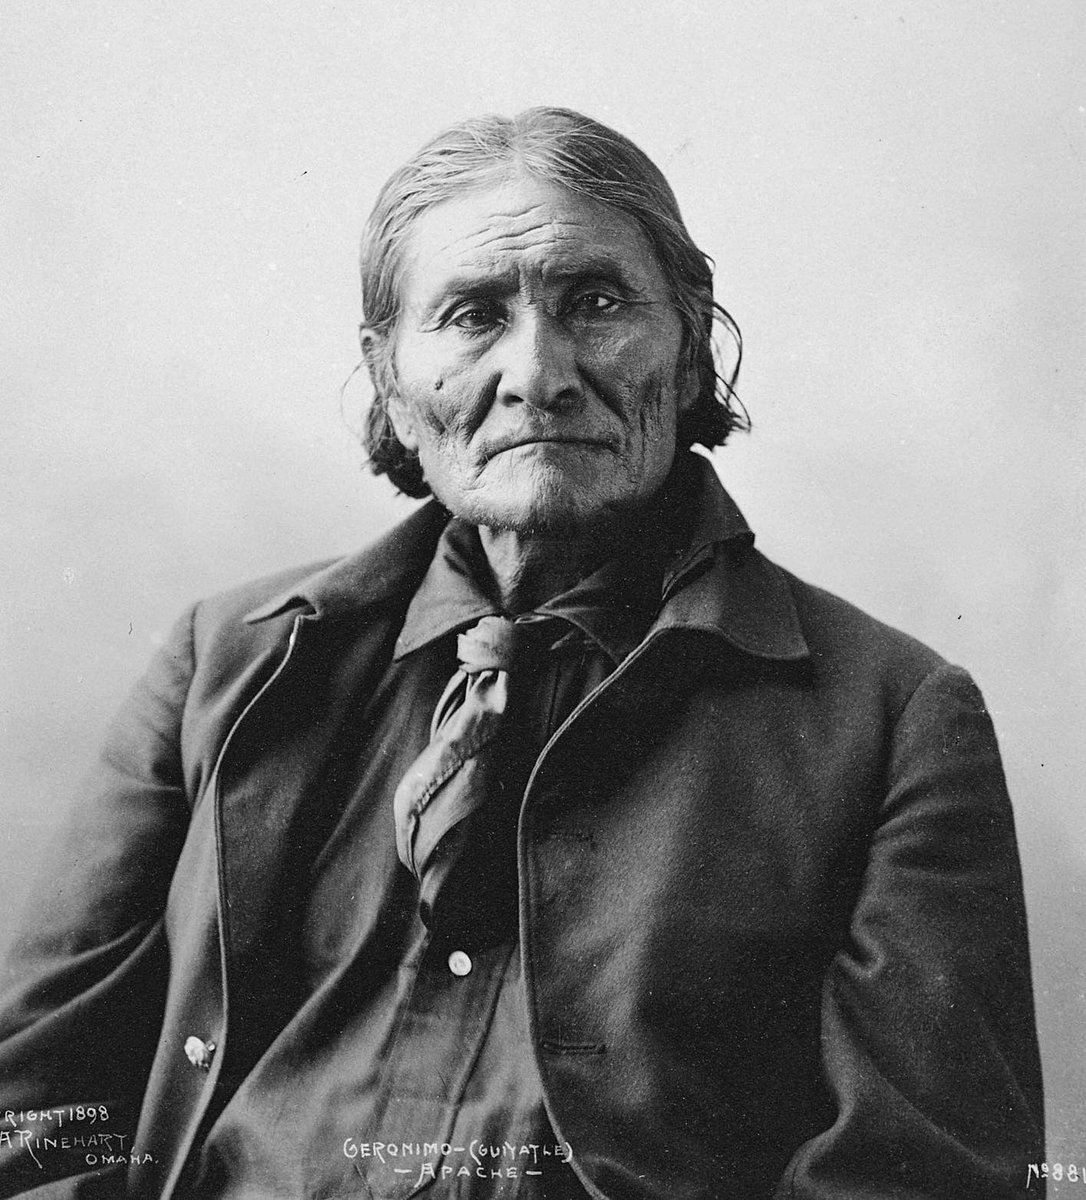 A photo portrait of the Bedonkohe Apache leader and medicine man, Geronimo. Taken in 1898 by Frank A Rinehart. #histmed #historyofmedicine #pastmedicalhistory